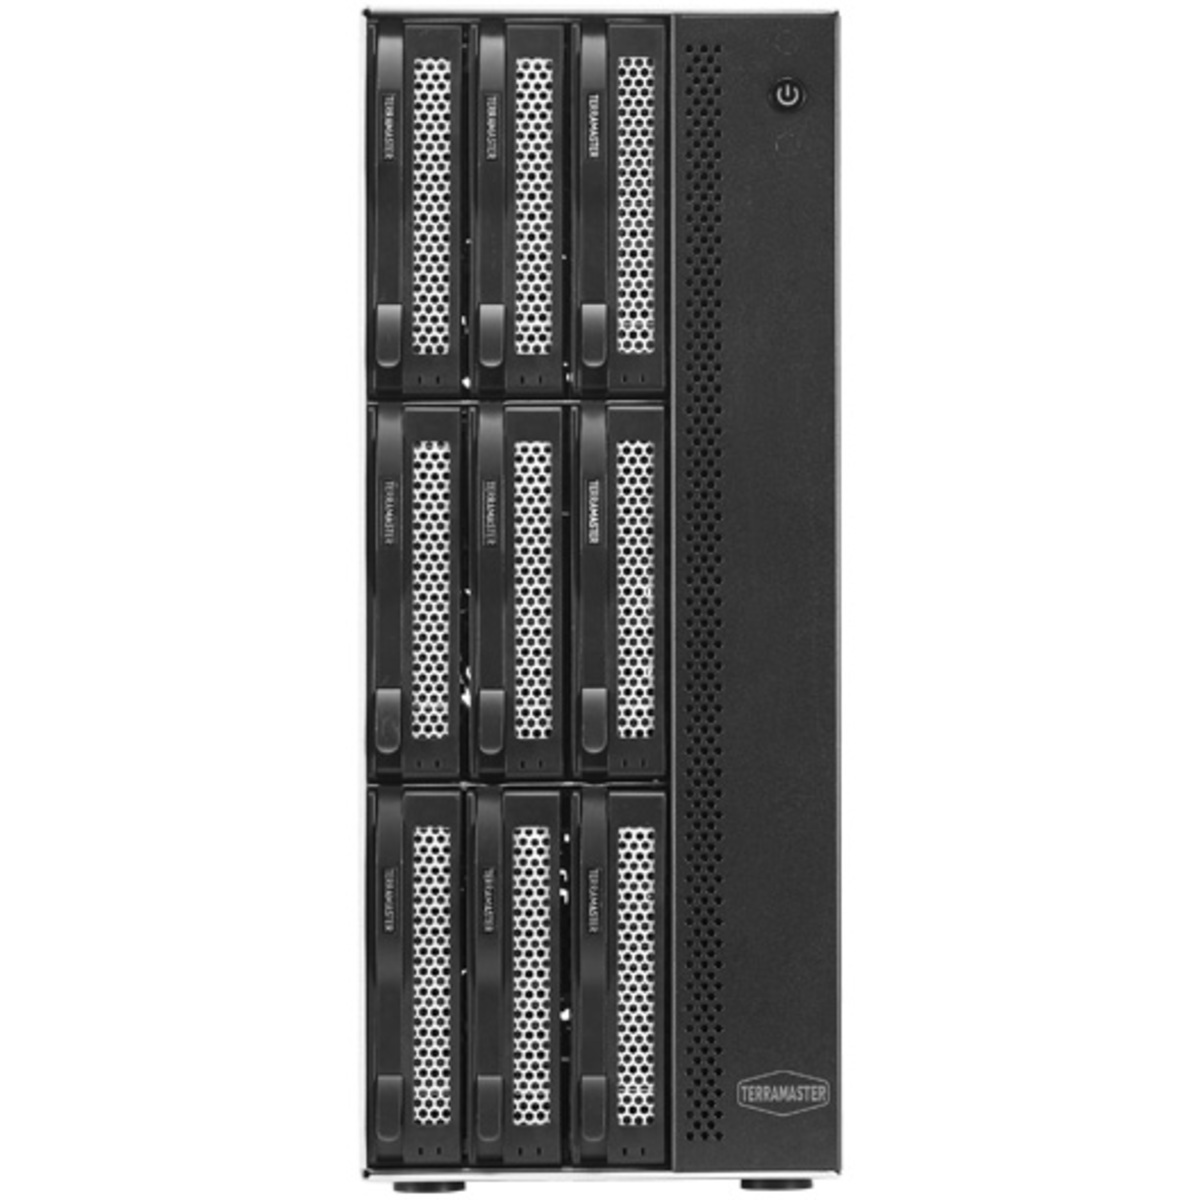 TerraMaster T9-450 198tb 9-Bay Desktop Multimedia / Power User / Business NAS - Network Attached Storage Device 9x22tb Western Digital Red Pro WD221KFGX 3.5 7200rpm SATA 6Gb/s HDD NAS Class Drives Installed - Burn-In Tested T9-450